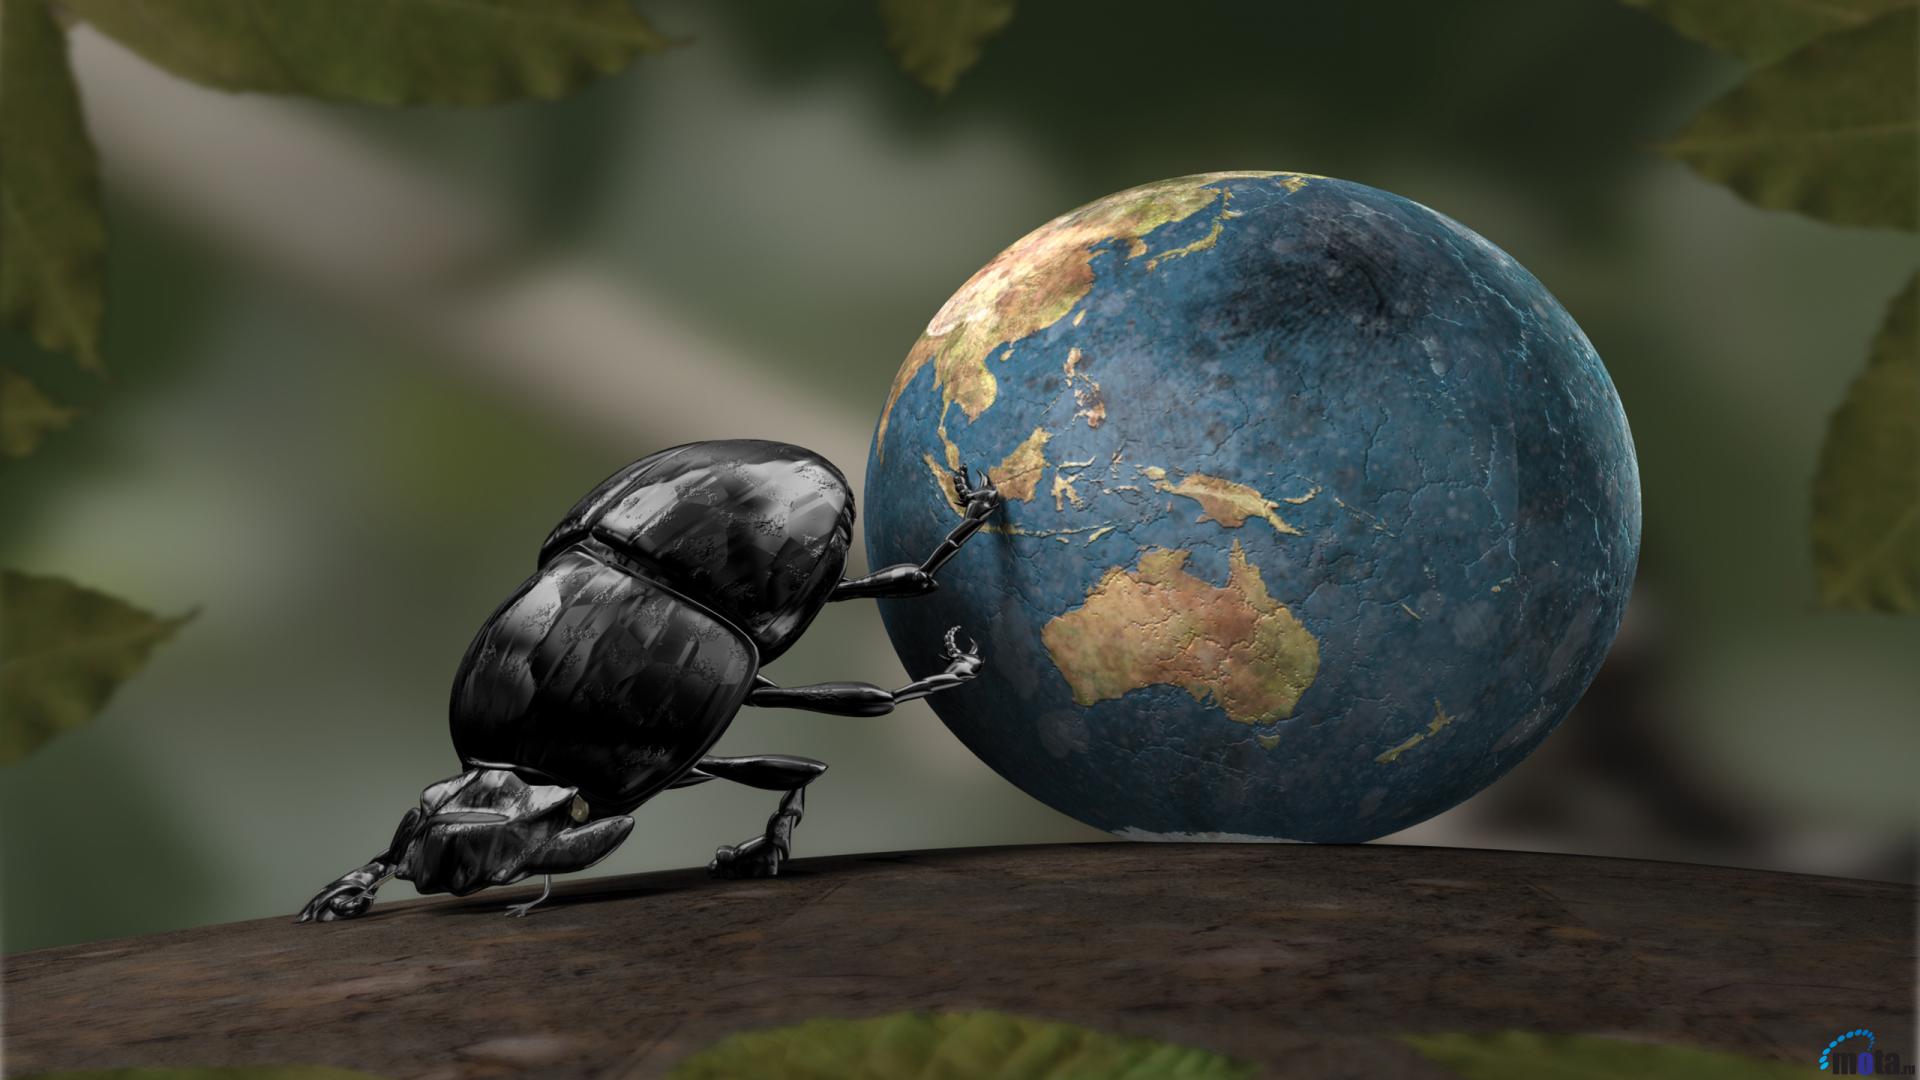 Download Wallpaper Earth boring dung beetle 1920 x 1080 HDTV